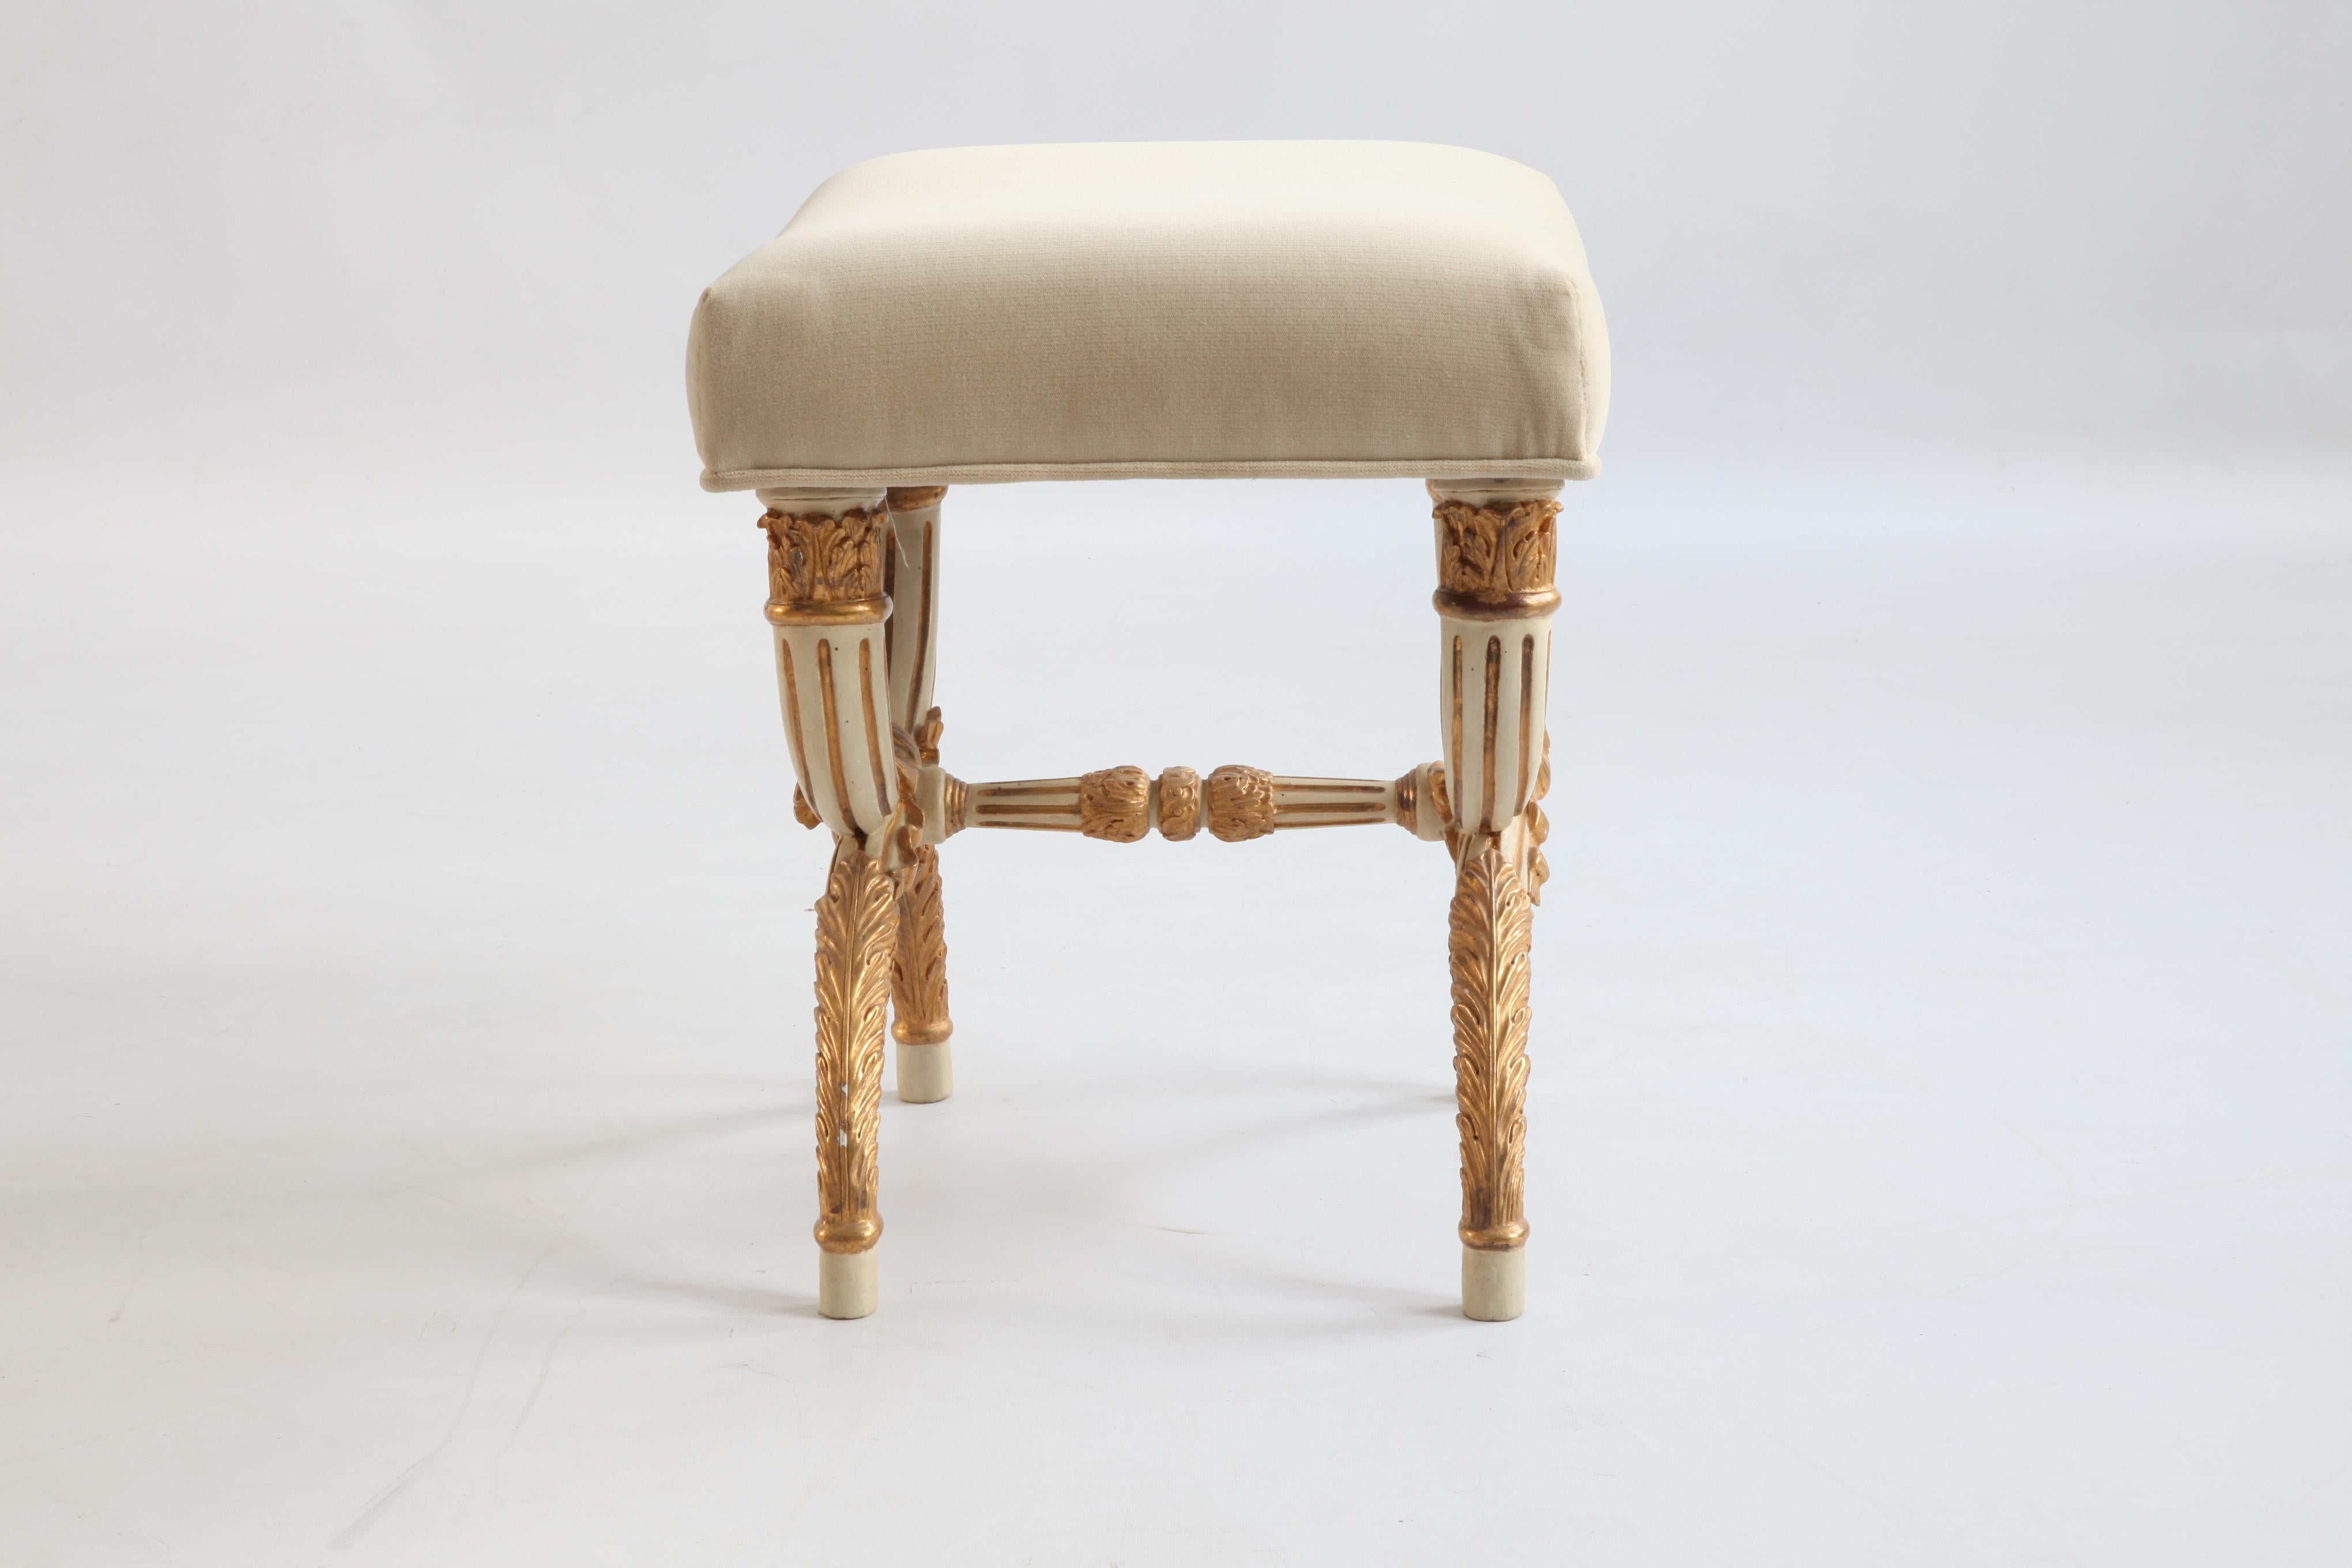 British Louis XVI Style Stool in X-Shaped, Painted in Warm Grey with Gold Highlights